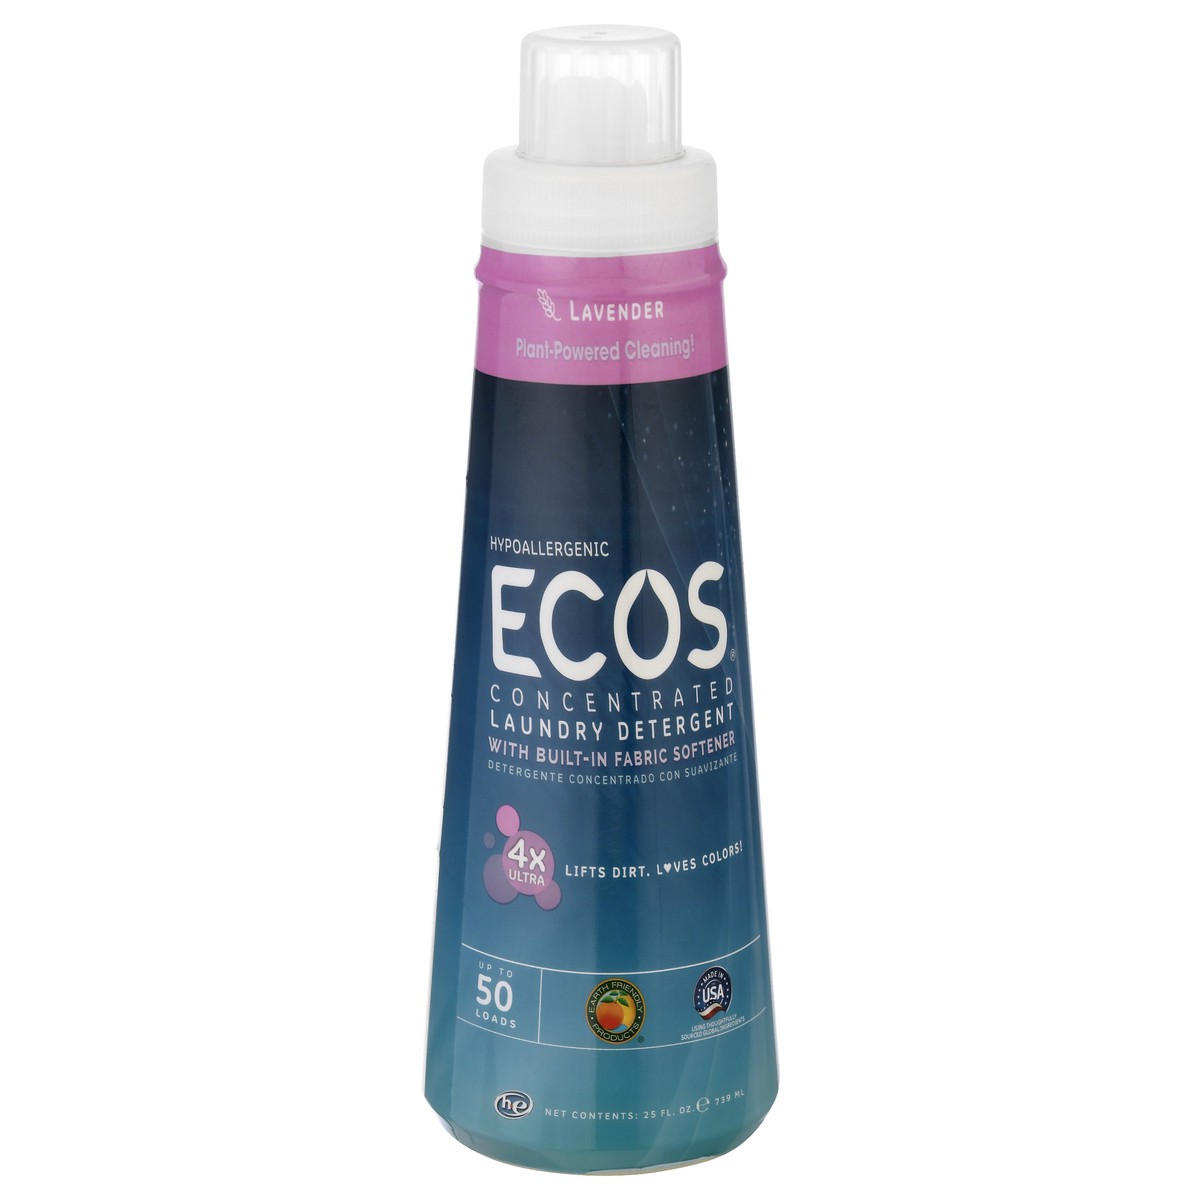 slide 2 of 12, ECOS Hypoallergenic Concentrated Lavender Laundry Detergent 25 oz, 25 oz